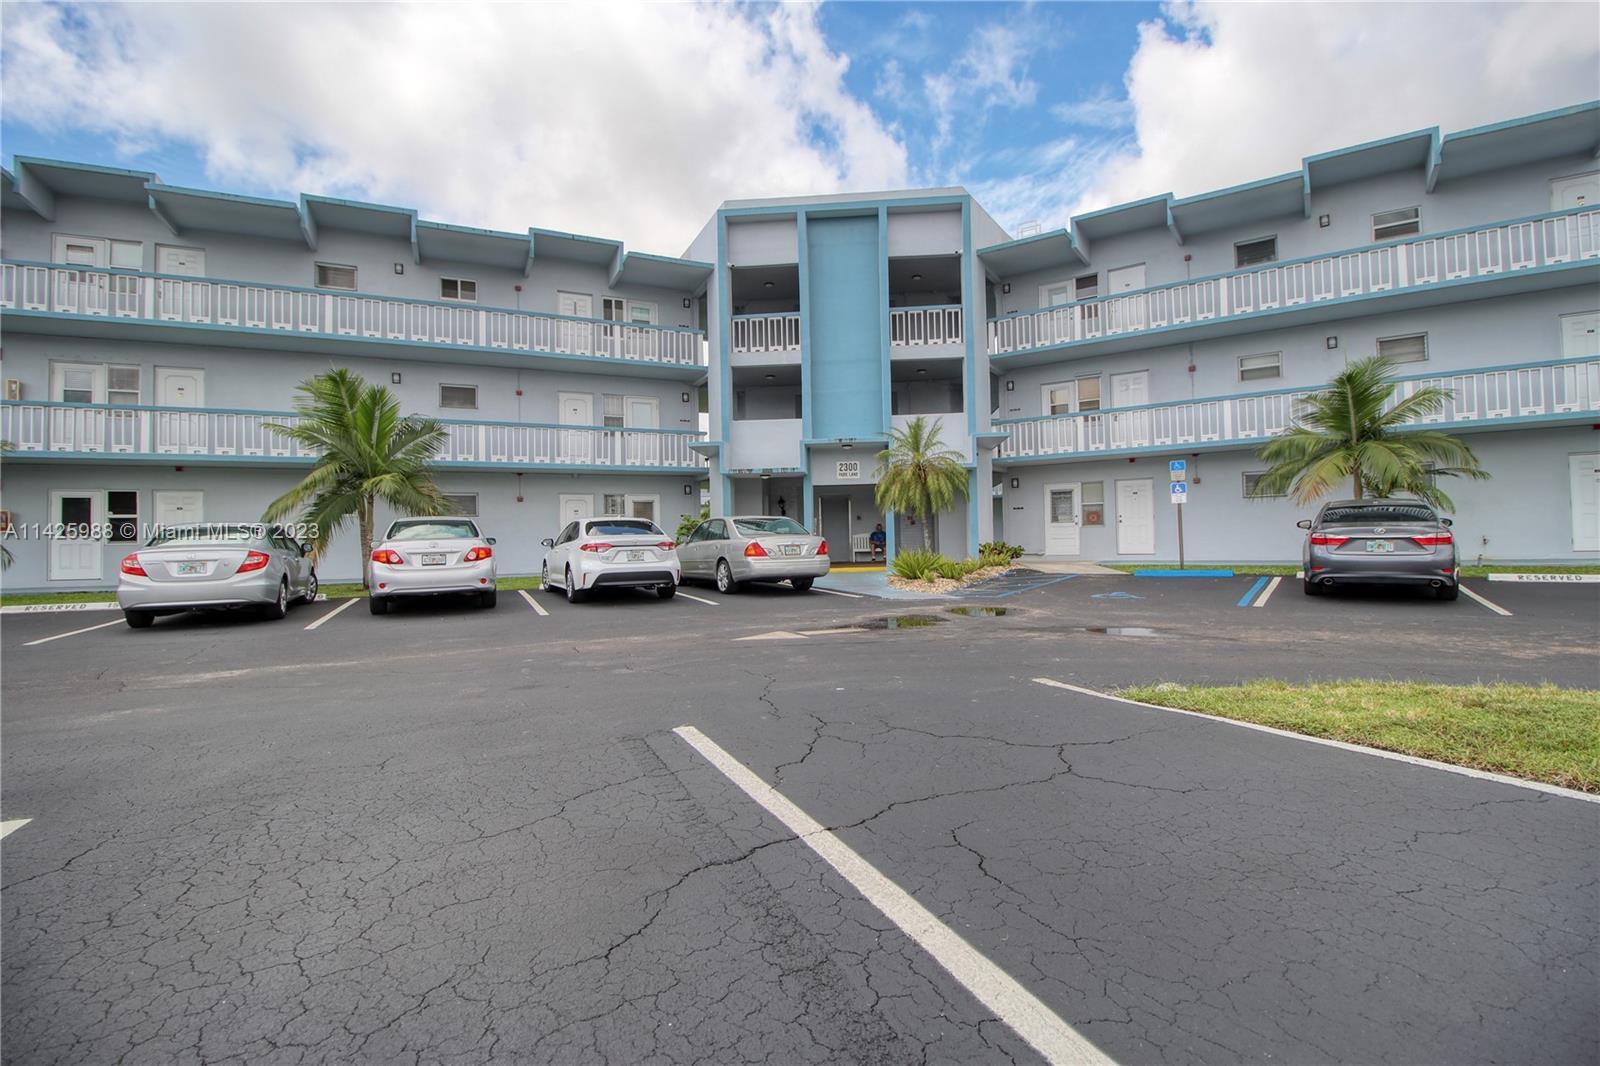 Photo of 2300 Park Ln #311 in Hollywood, FL